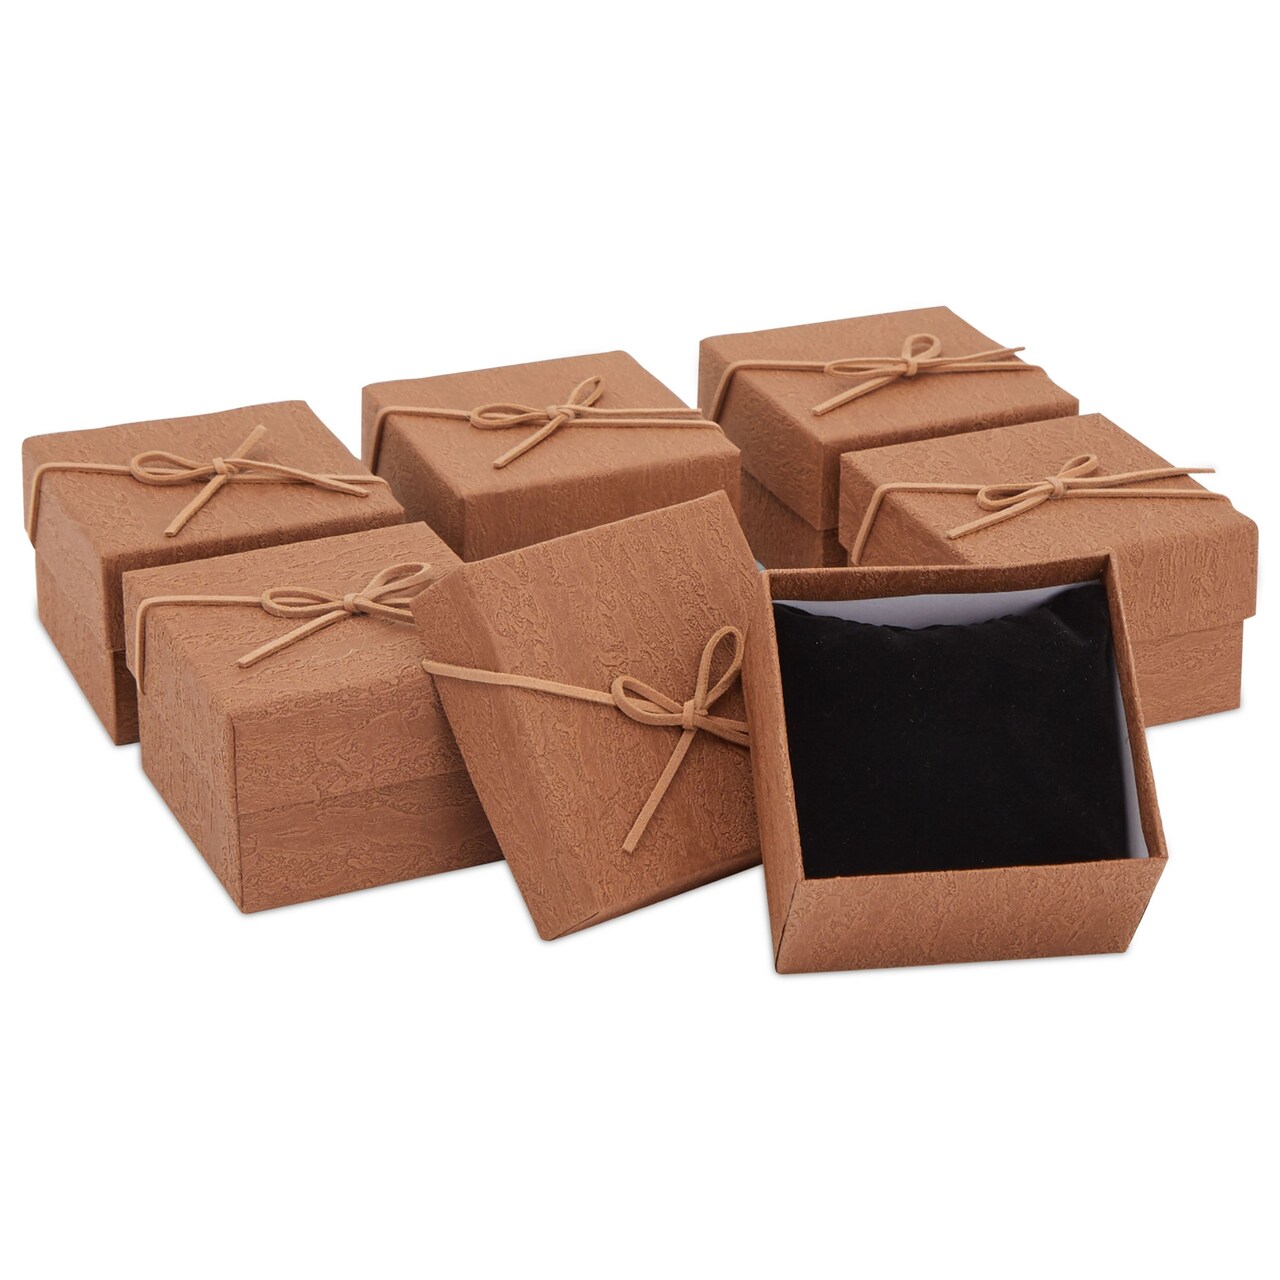 6 Pack Small Gift Boxes with Lids and Velvet Pillow Insert for Jewelry,  Bracelets, Keychains (3.5 x 3.5 x 2.3 In)